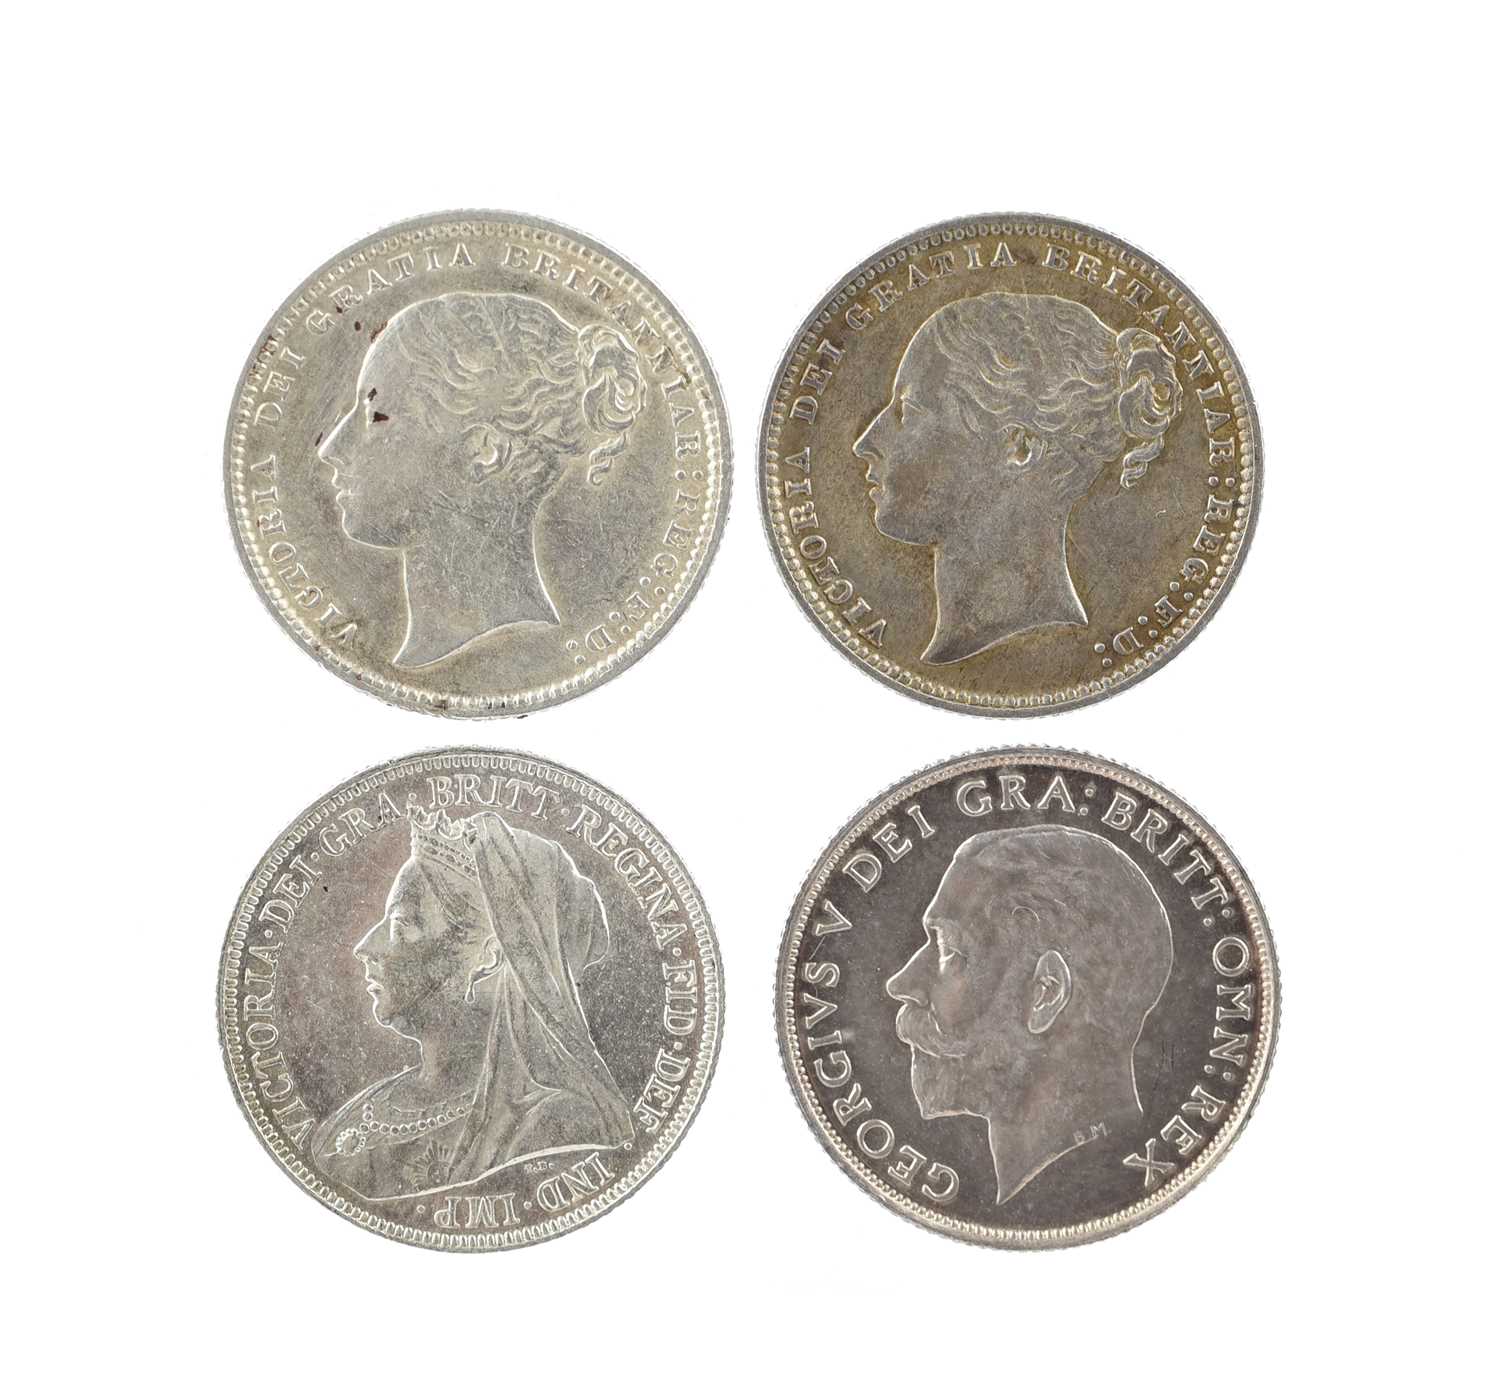 Four silver shillings, vis.: Victoria, 1873 and 1877, die number 73 and 33 (S 3906A), both near very